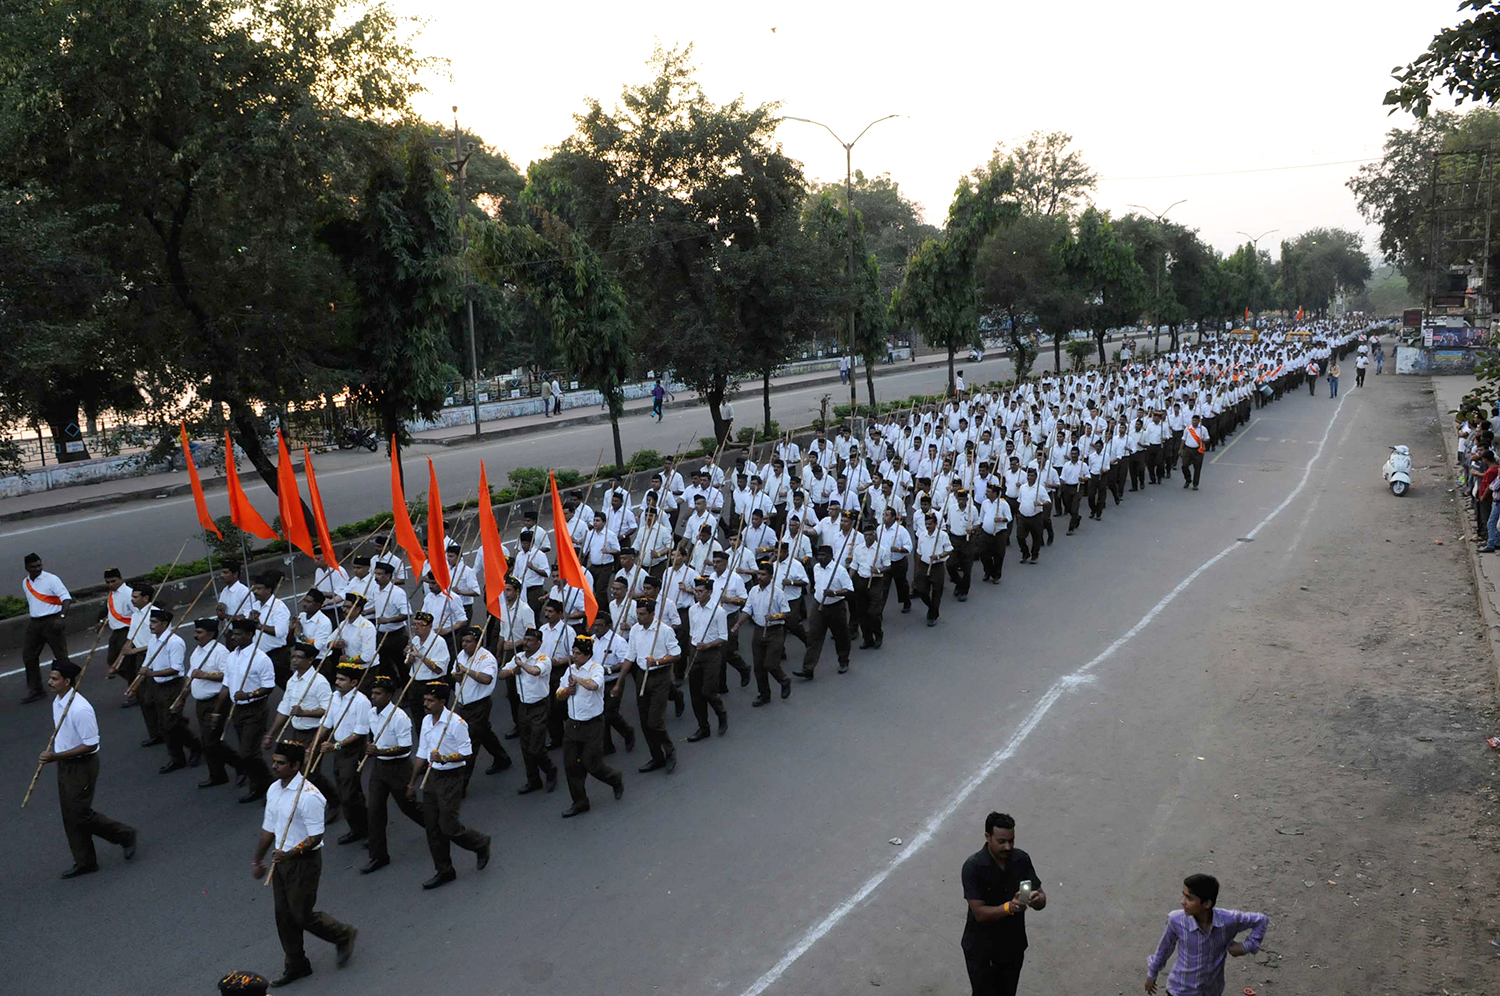 RSS prepares voter list for targeted campaigning in MP after Congress manifesto threat